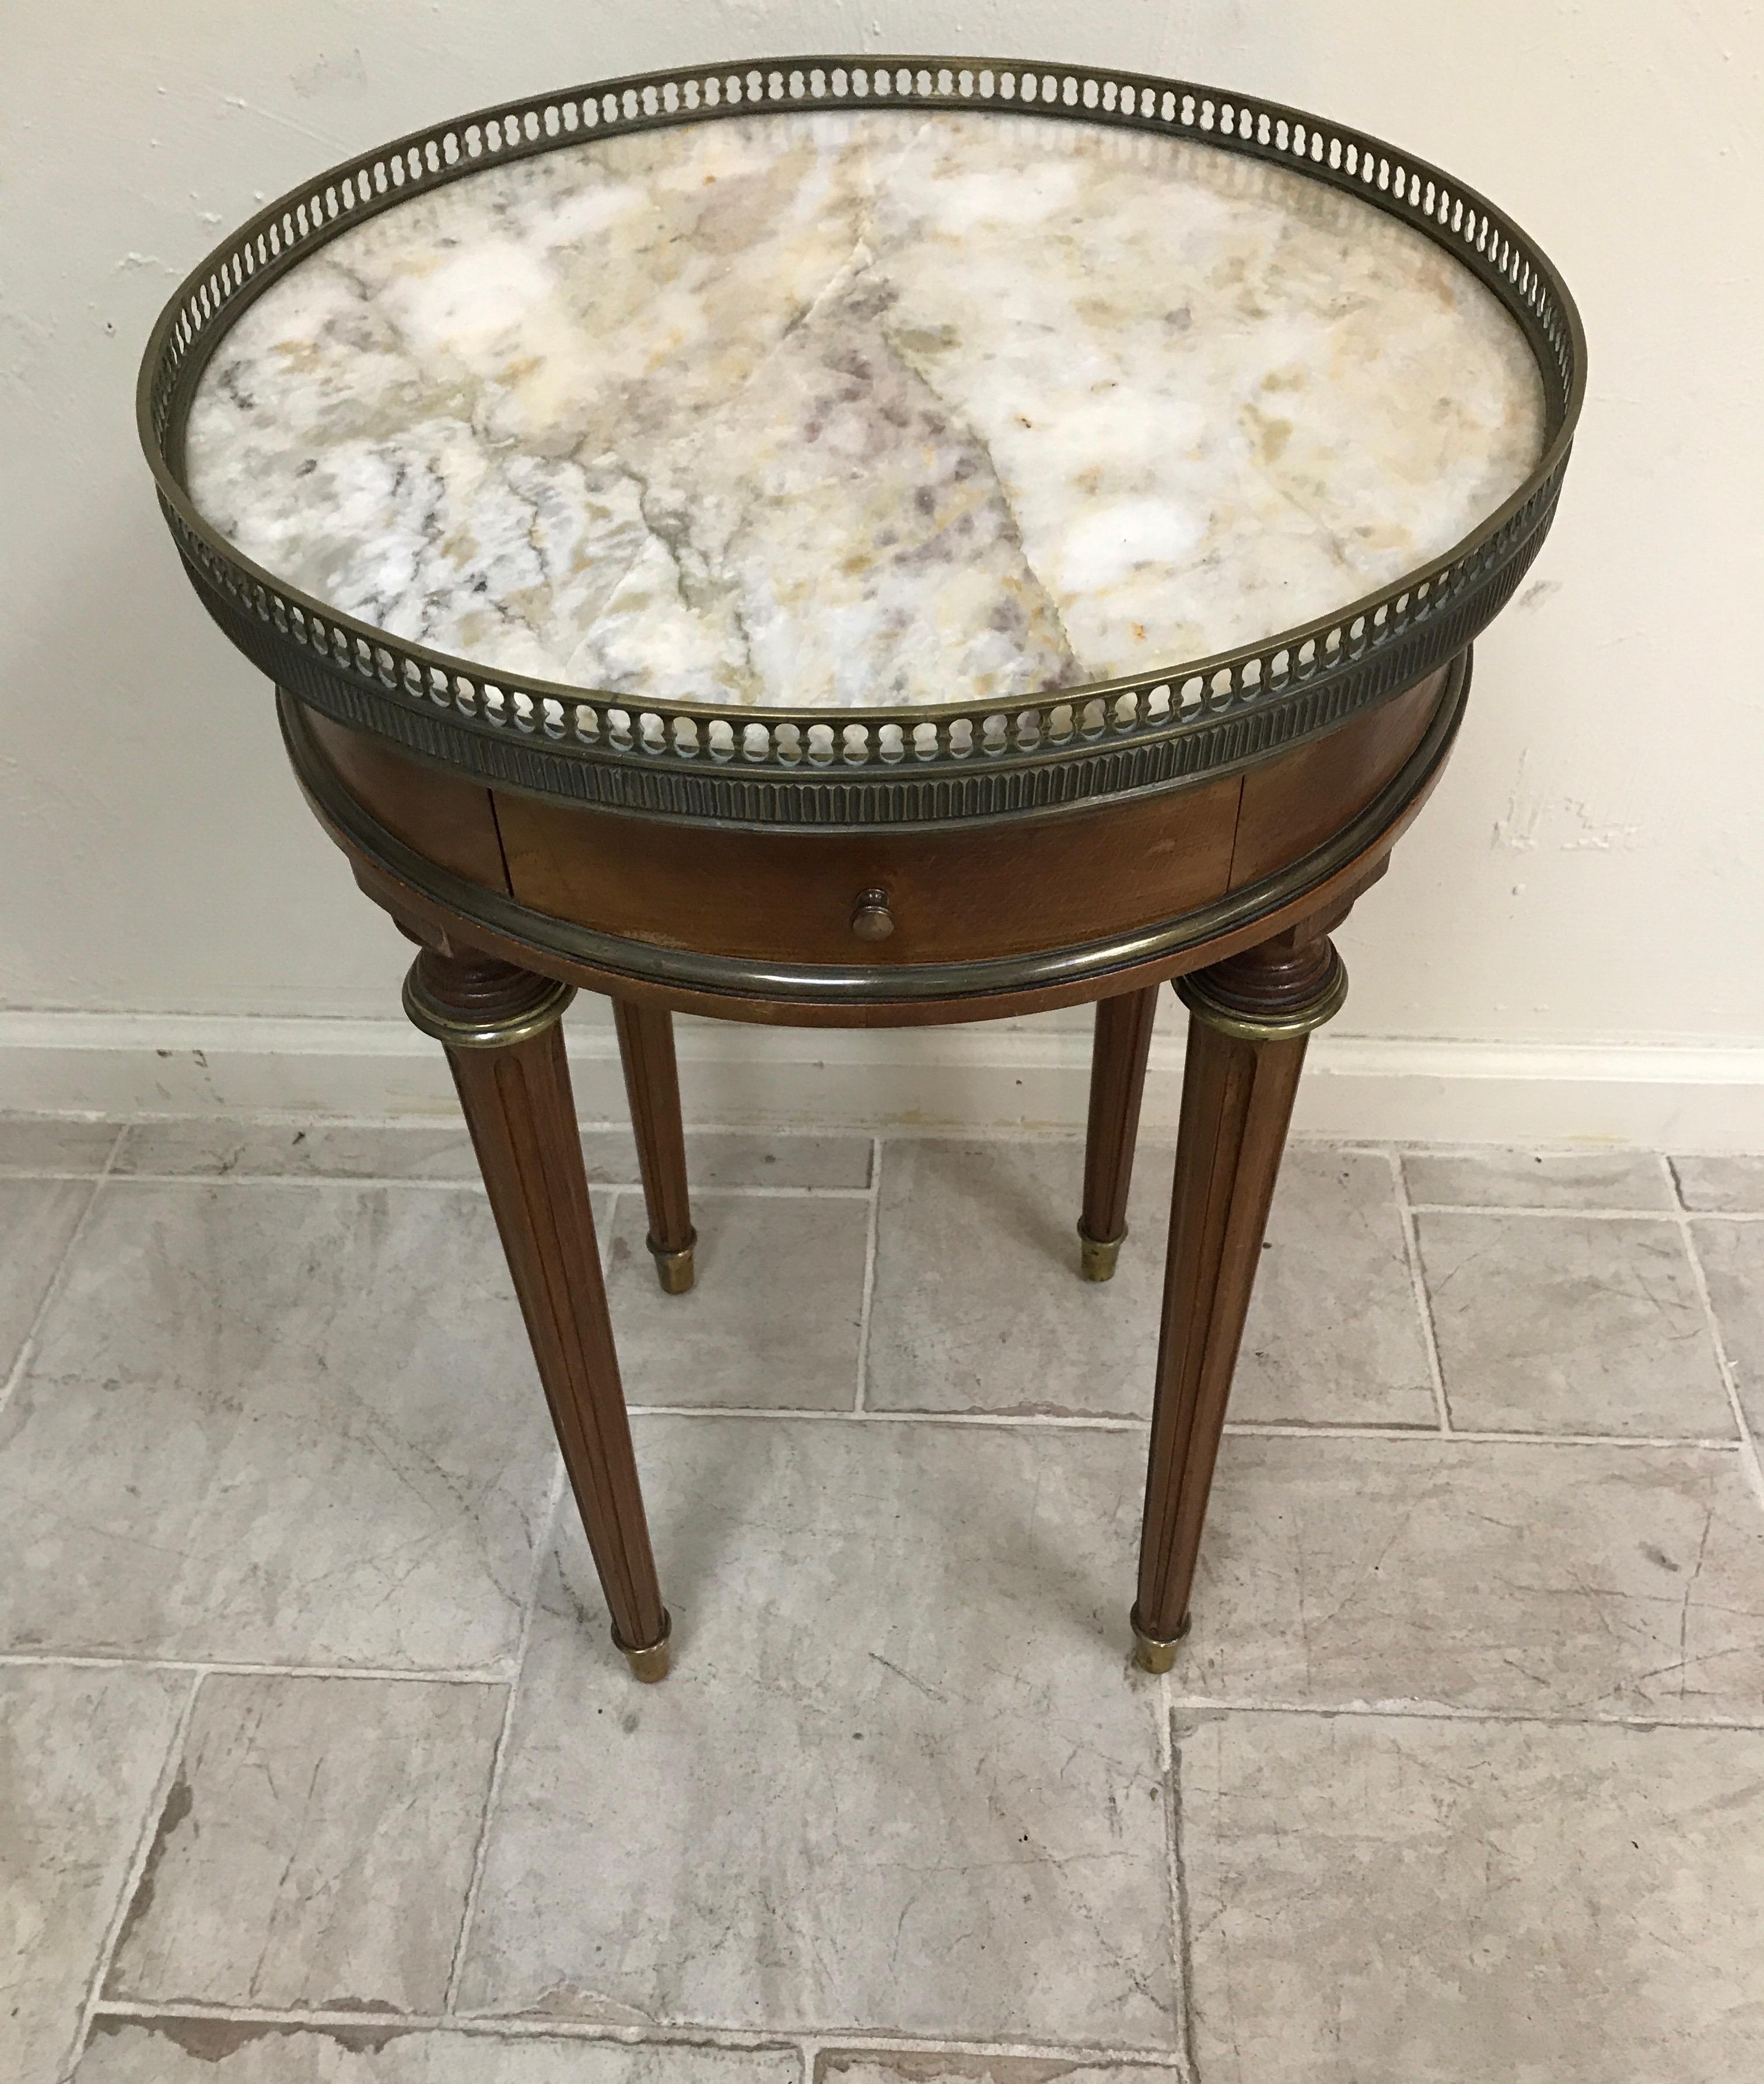 Louis XVI style marble-top end/drinks table with brass gallery and one-drawer.
Marble is white with gold and purple veins.